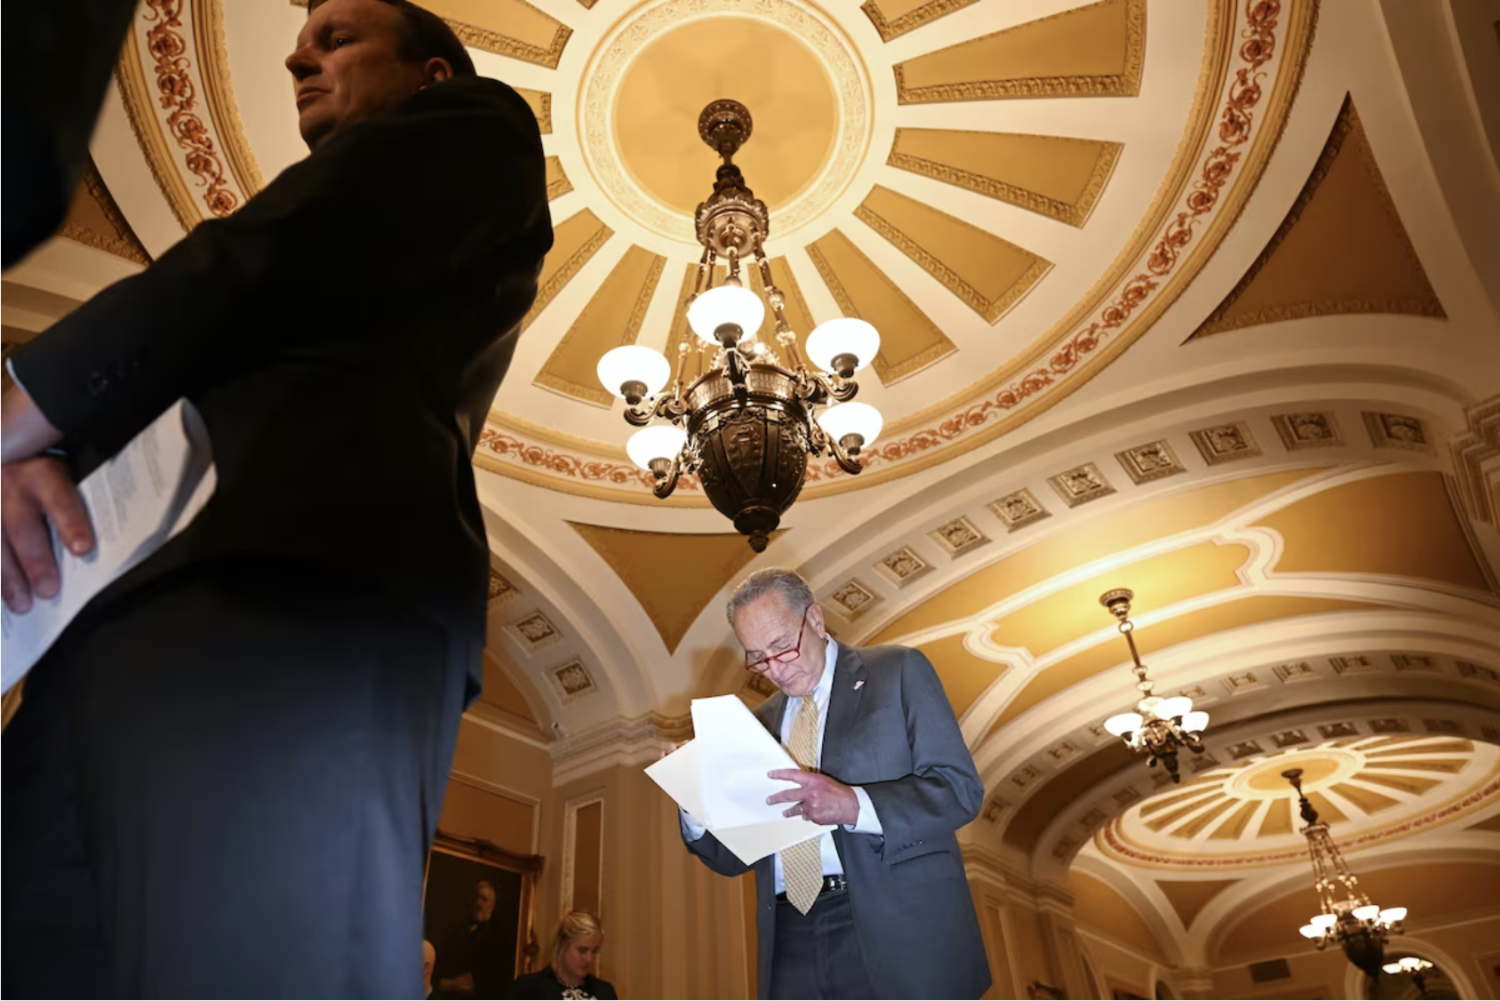 Senate Majority Leader Charles E. Schumer (D-N.Y.) during a news conference at the Capitol on Tuesday. (Matt McClain/The Washington Post)